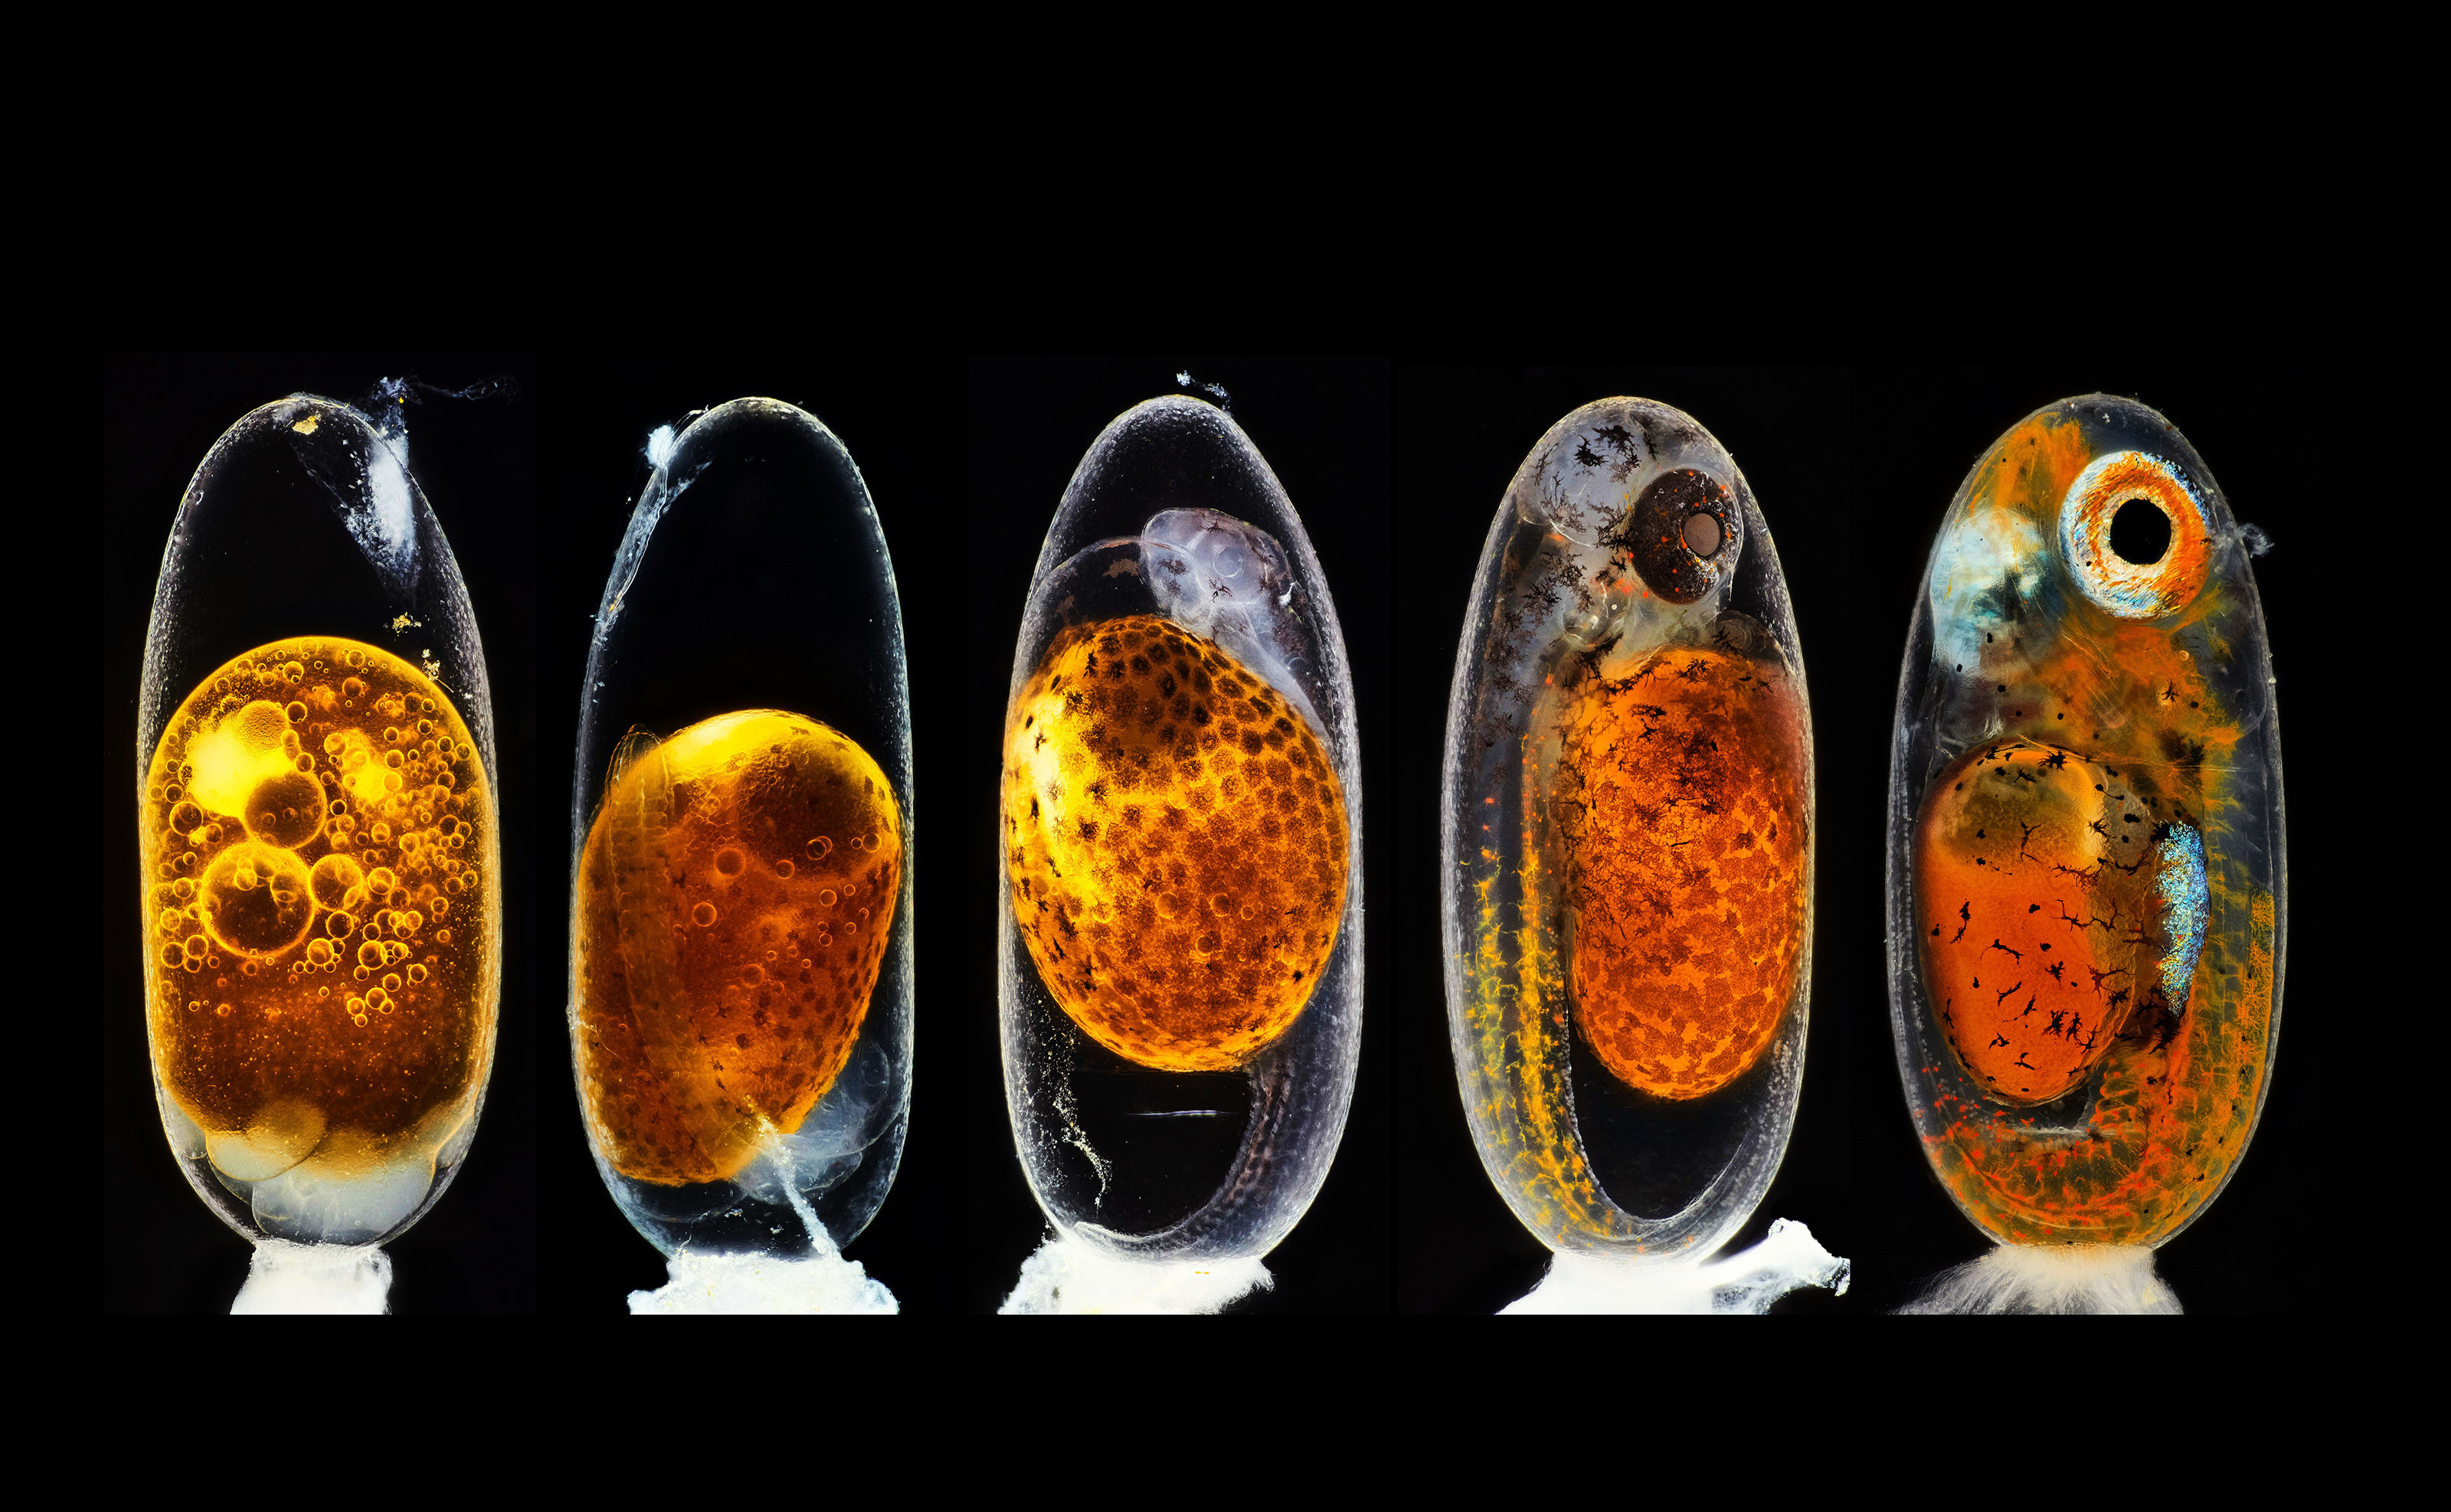 2020 nikon photomicrography competition winners - Embryonic development of a clownfish (Amphiprion percula) on days 1, 3 (morning and evening), 5, and 9